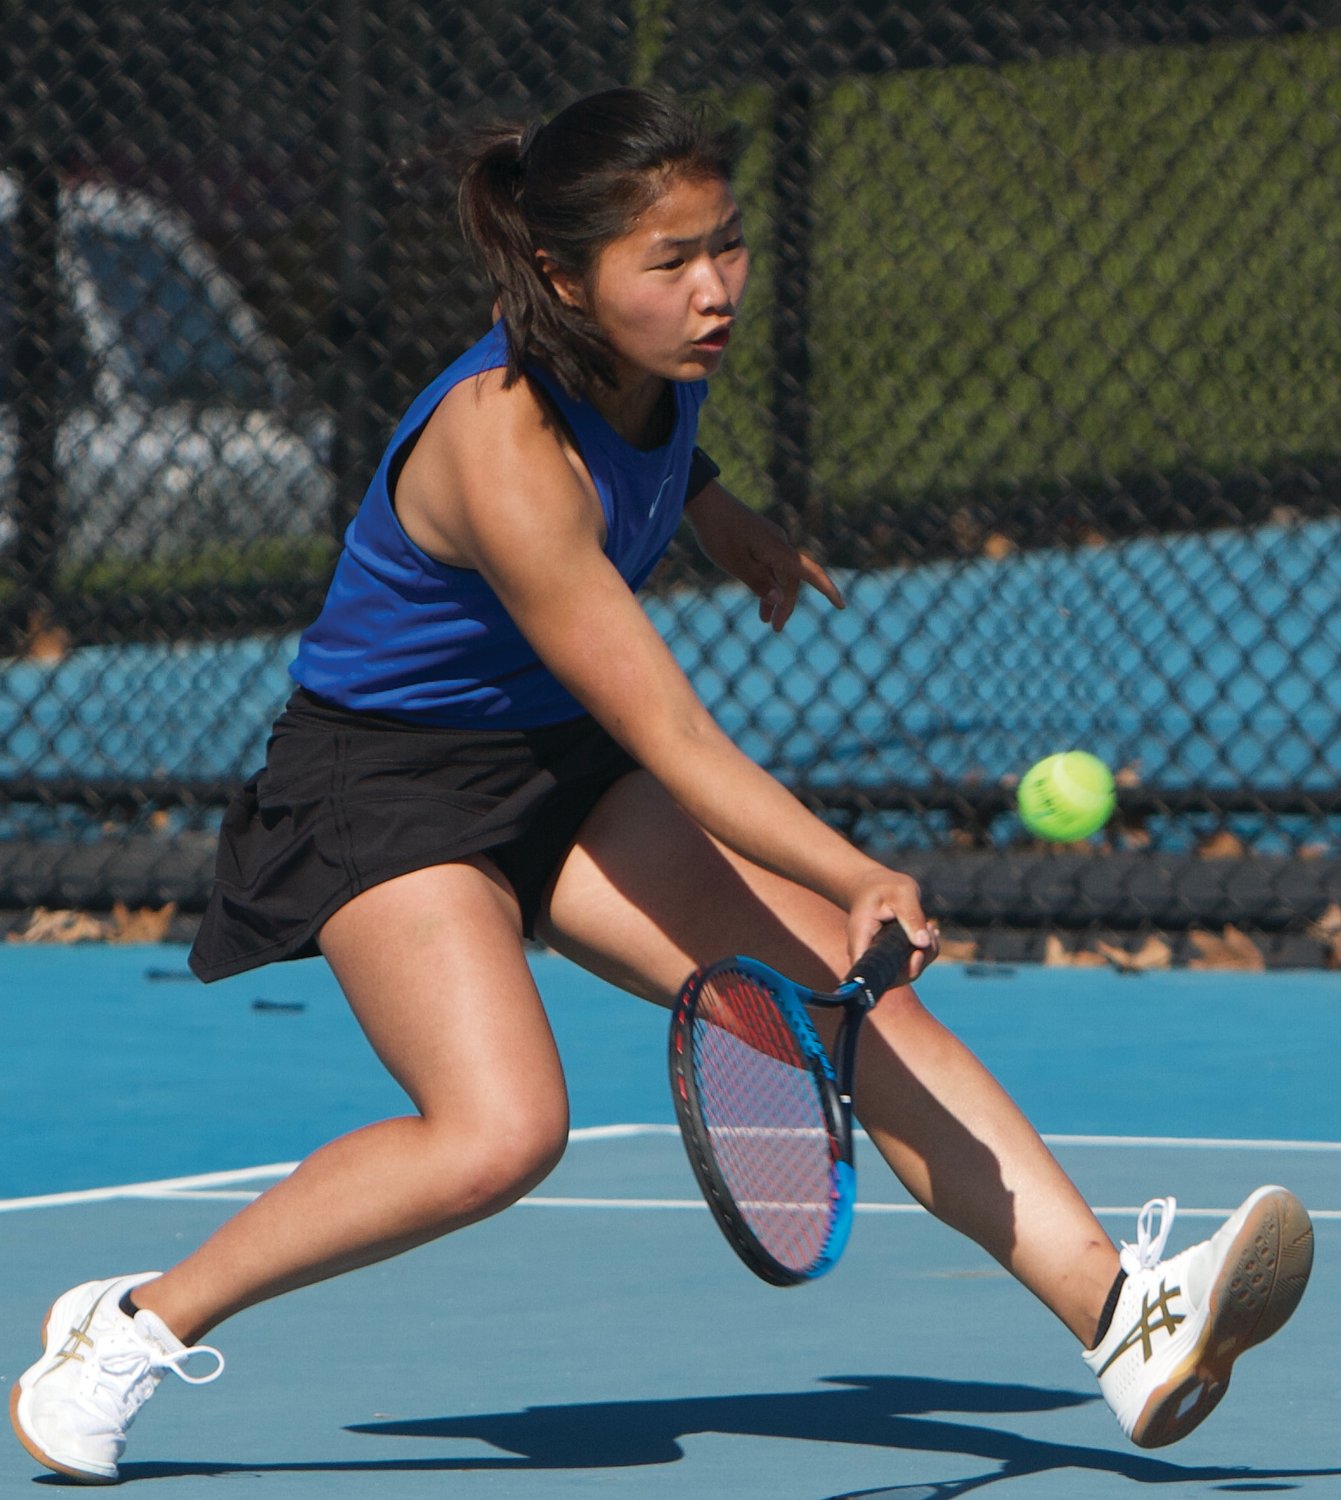 Crawfordsville senior Hannah McLean sealed the win for the Athenians on Wednesday night with a 7-6, 6-4 win over Fountain Central.